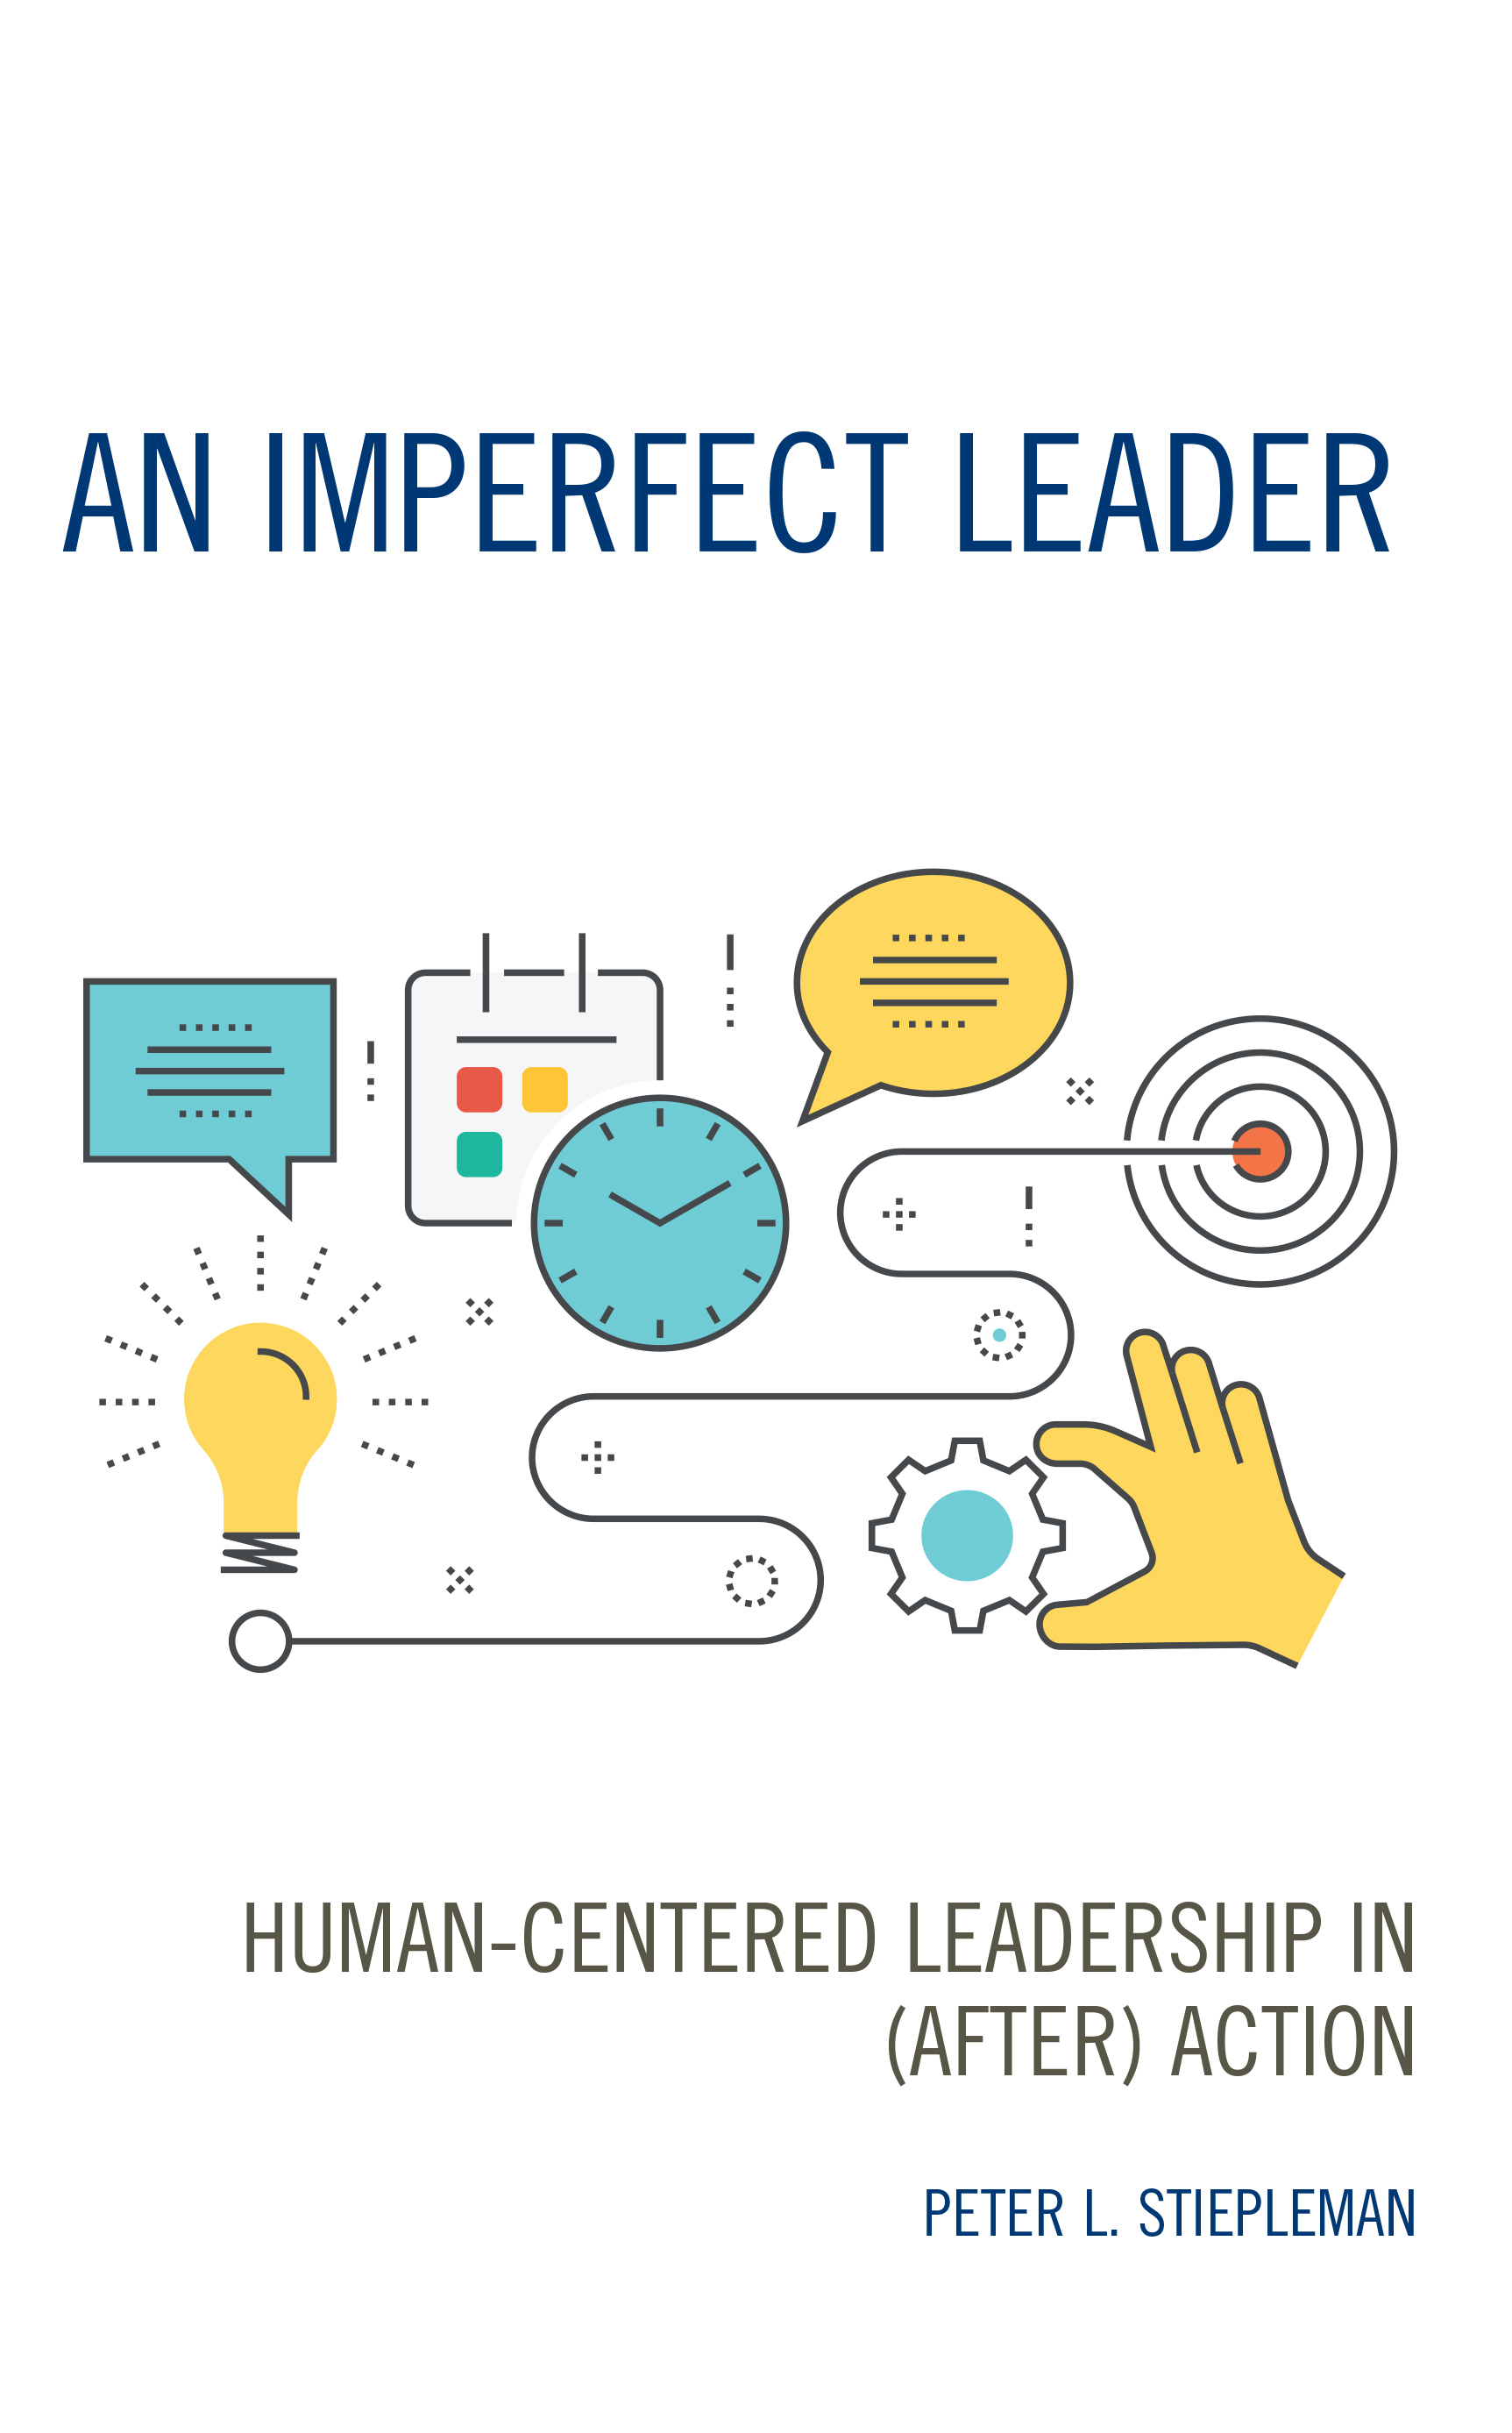 An Imperfect Leader: Human-Centered Leadership in (After) Action